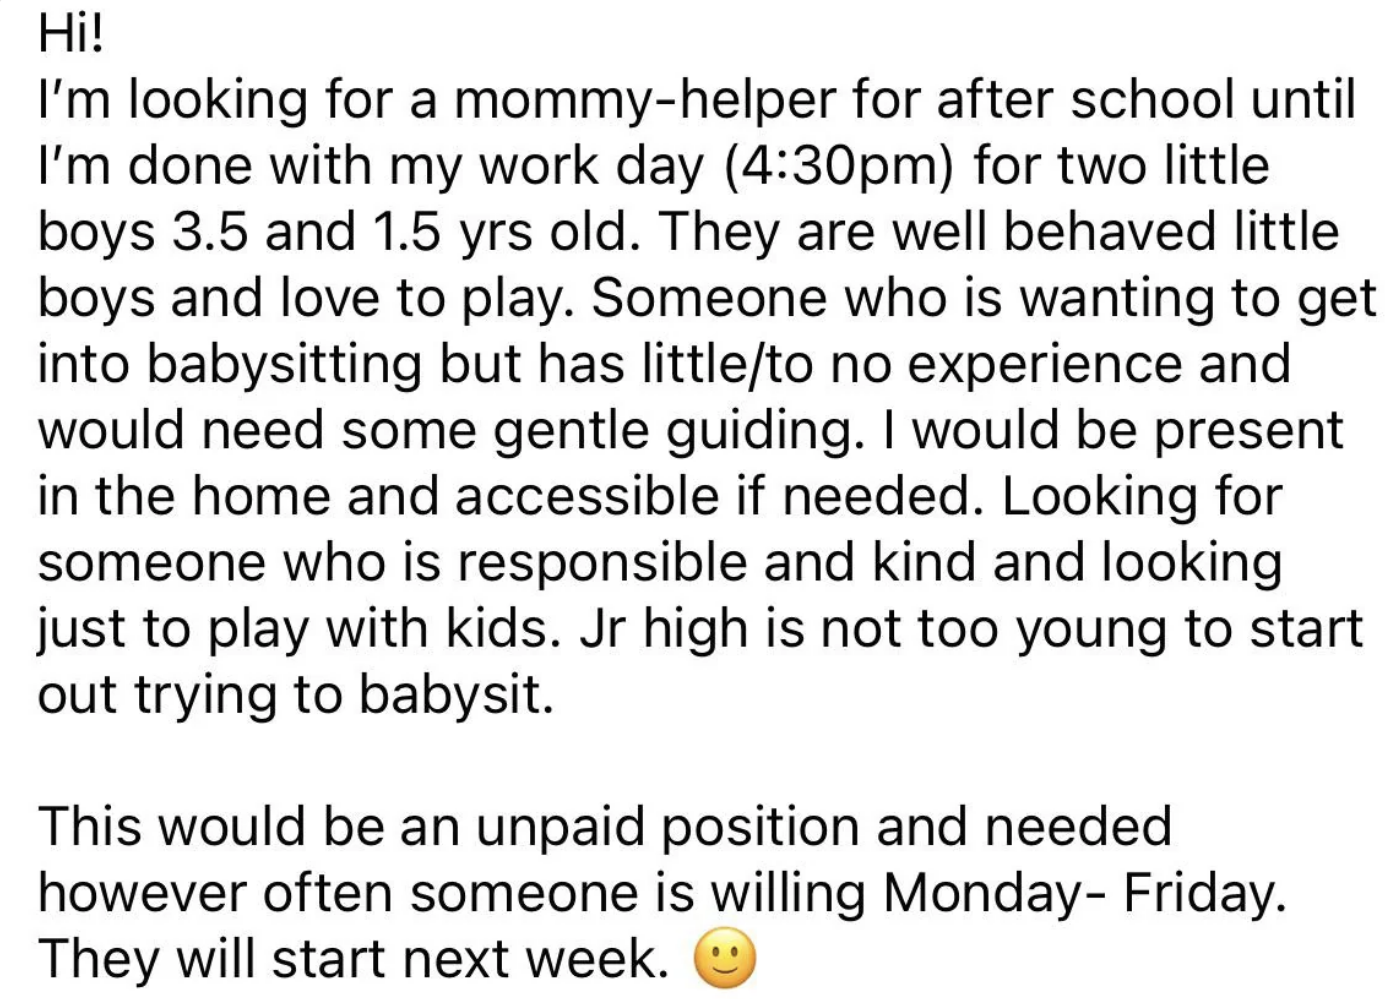 &quot;This would be an unpaid position and needed however often someone is willing&quot;